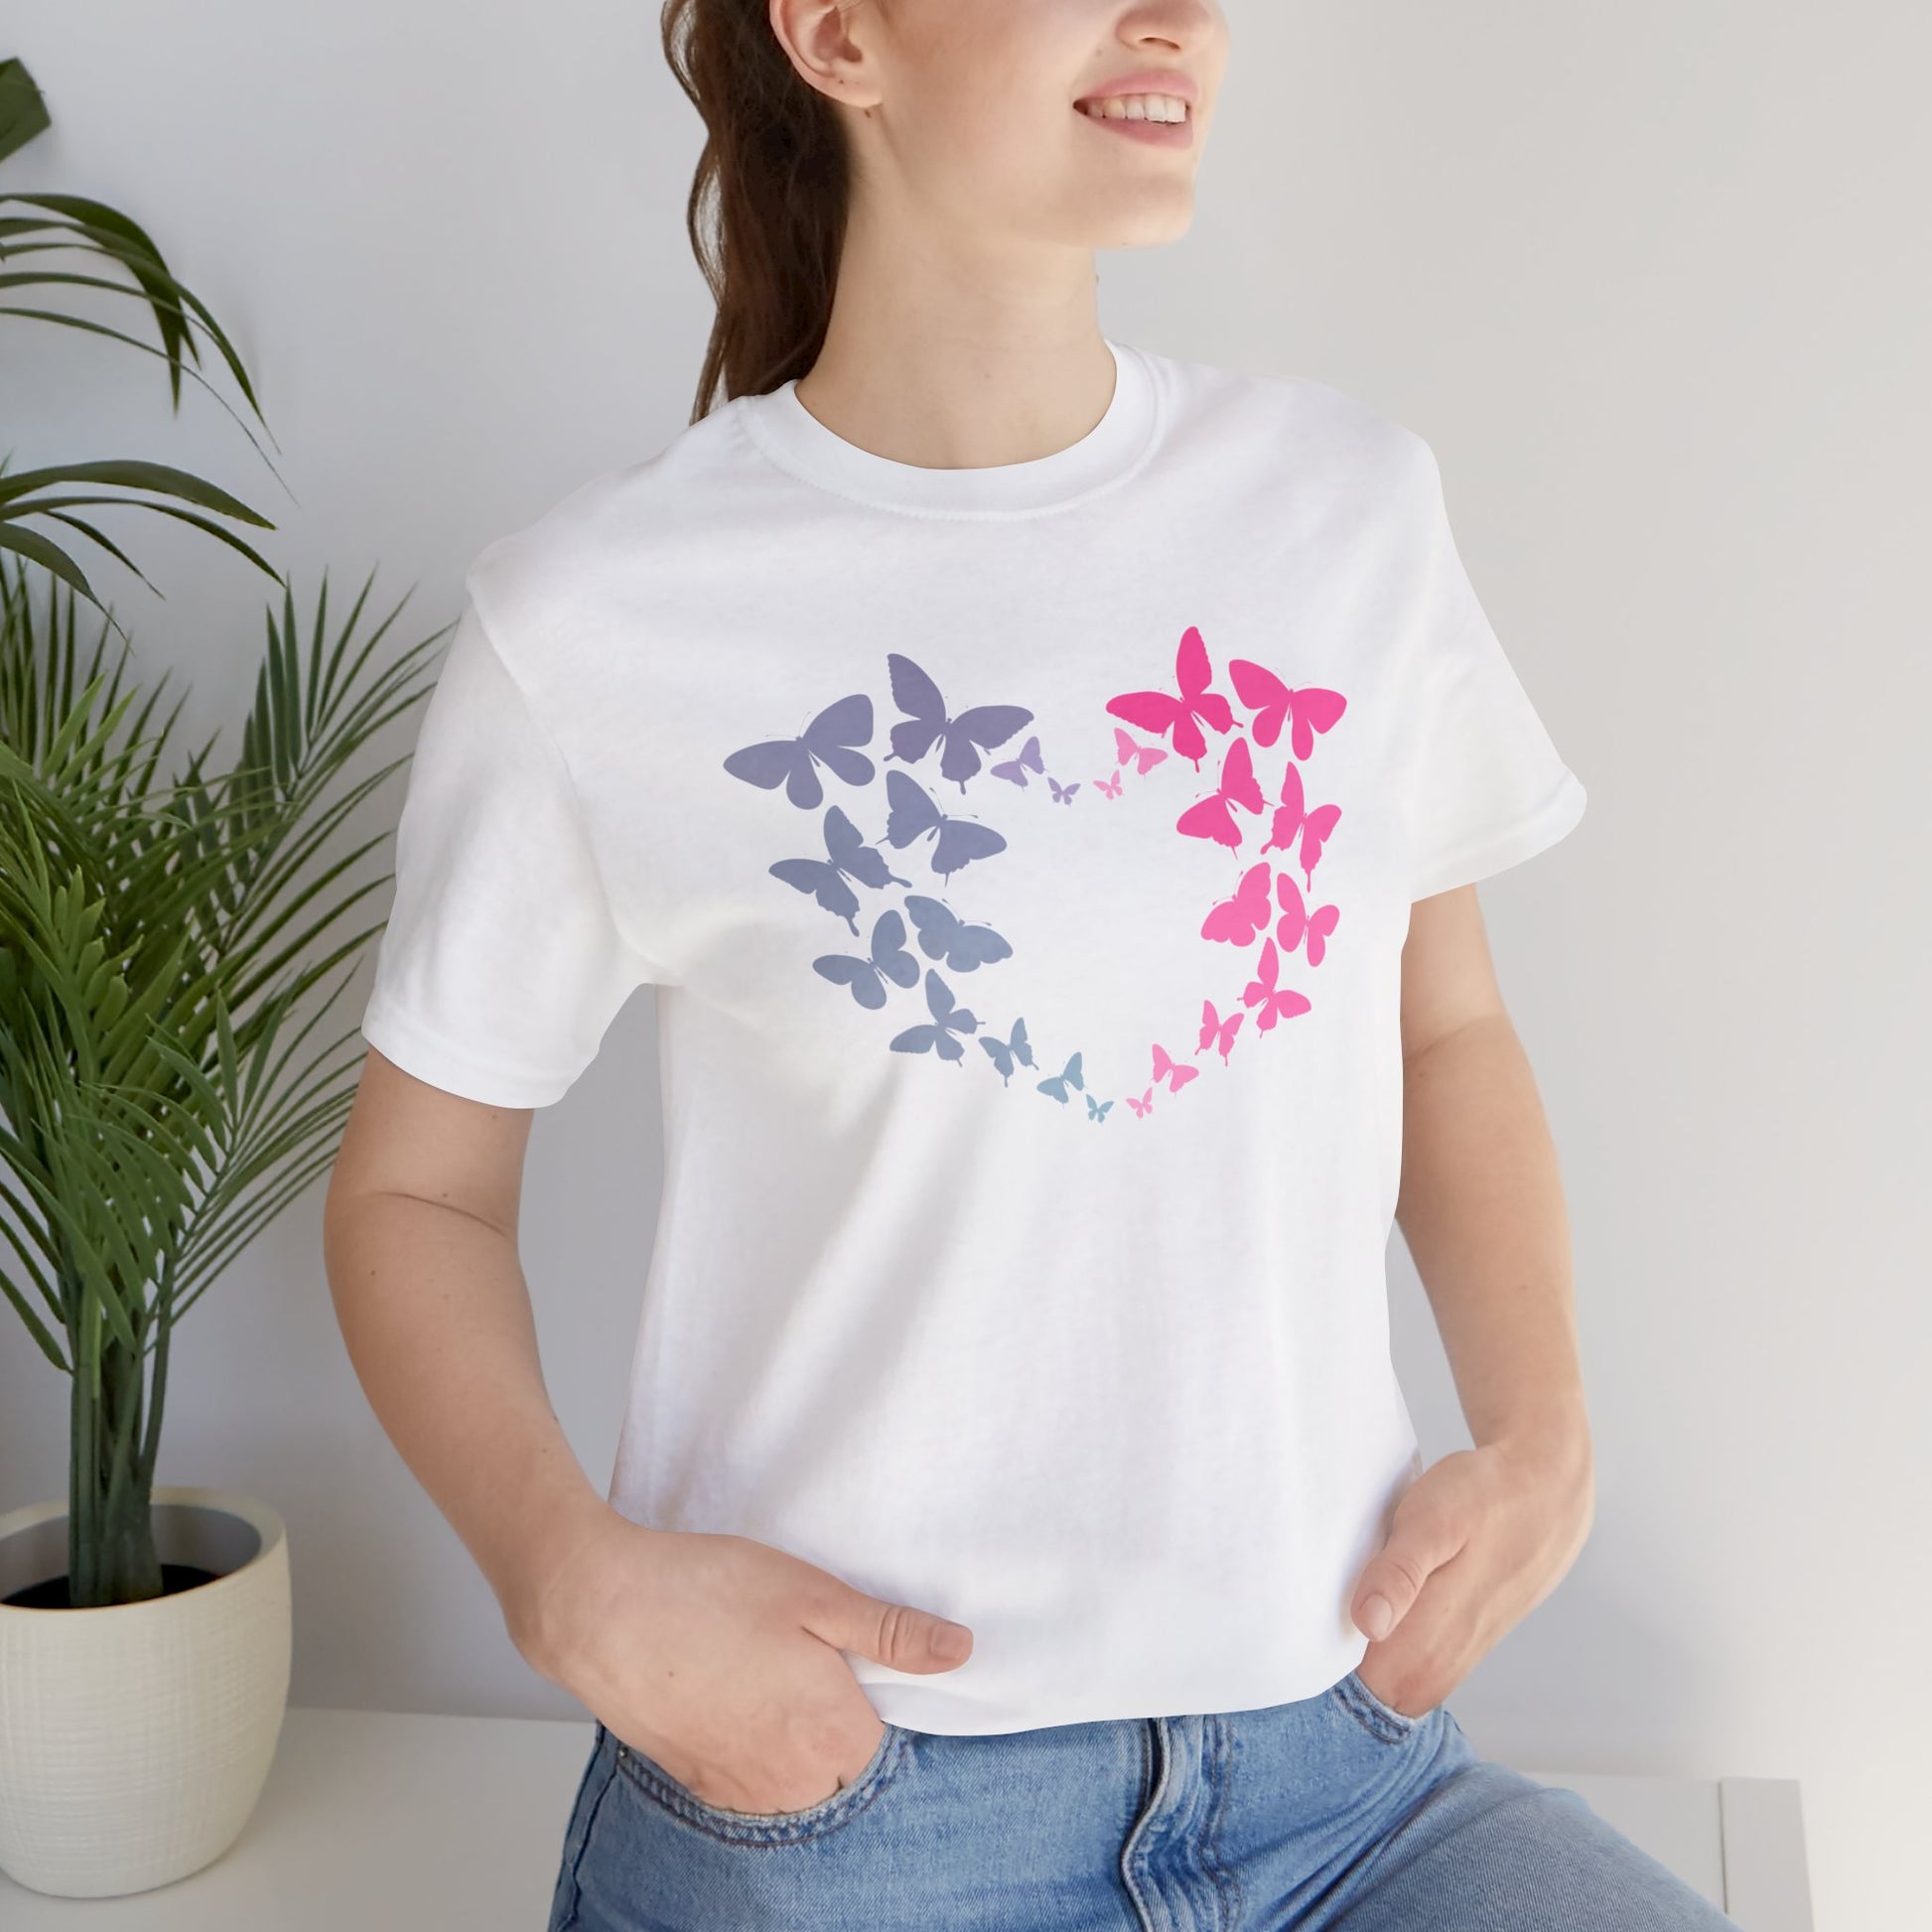 Grey and Pink Butterfly Heart - Soft Cotton Adult Unisex T-Shirt, Gift for friends and family, Gift for friends and family by clothezy.com - Buy Now